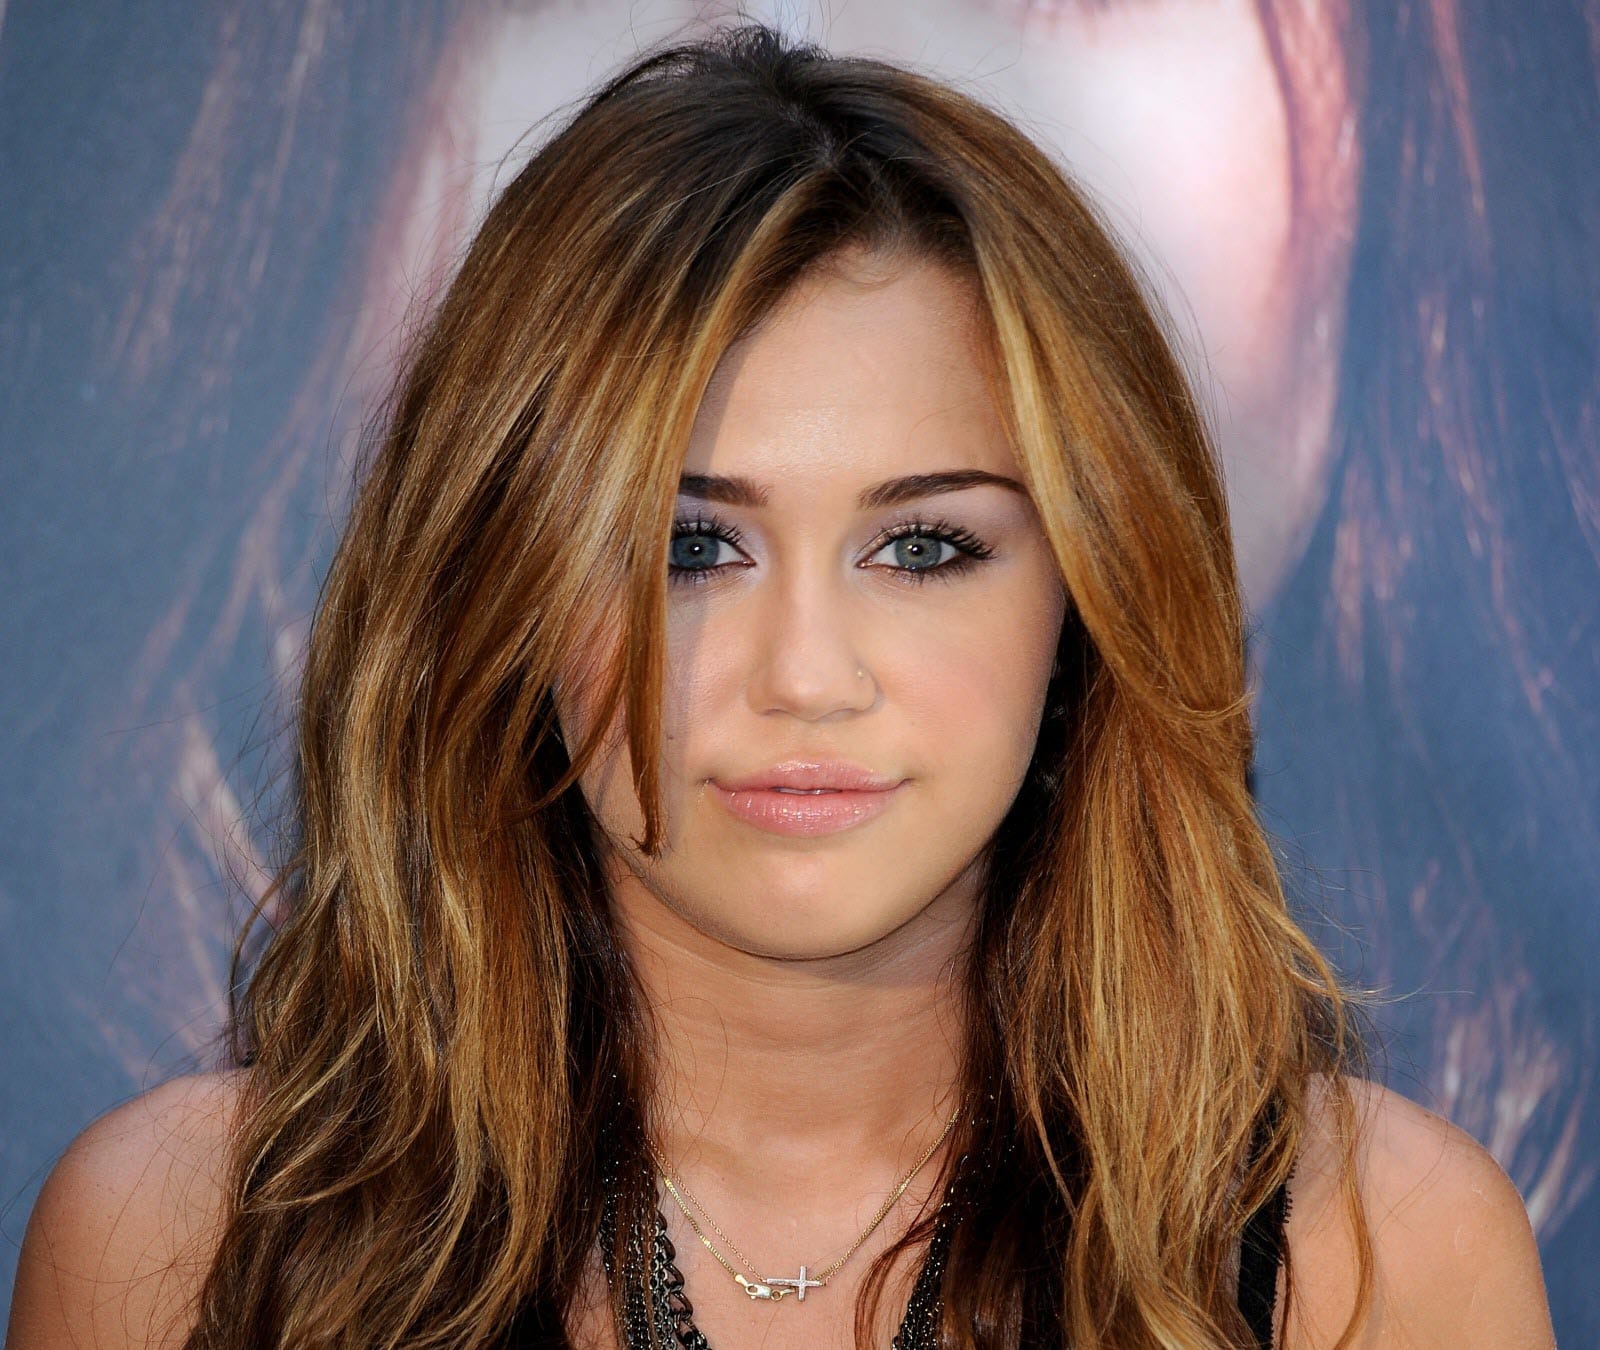 21 Miley Cyrus Songs and Performances That'll Make You a Fan